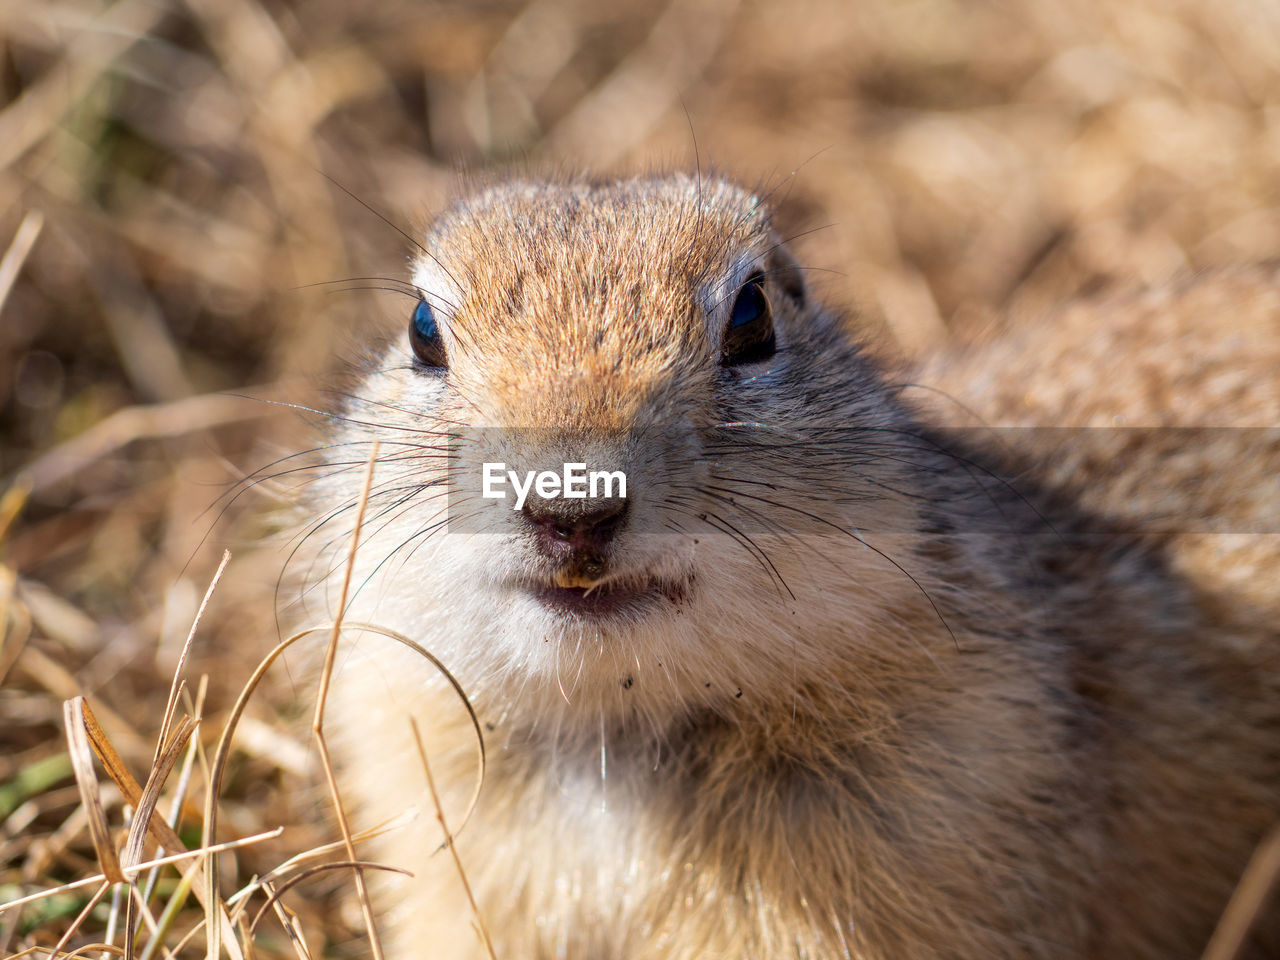 animal themes, animal, animal wildlife, one animal, whiskers, mammal, wildlife, prairie dog, squirrel, portrait, rodent, no people, nature, looking at camera, close-up, animal body part, outdoors, cute, day, animal hair, front view, animal head